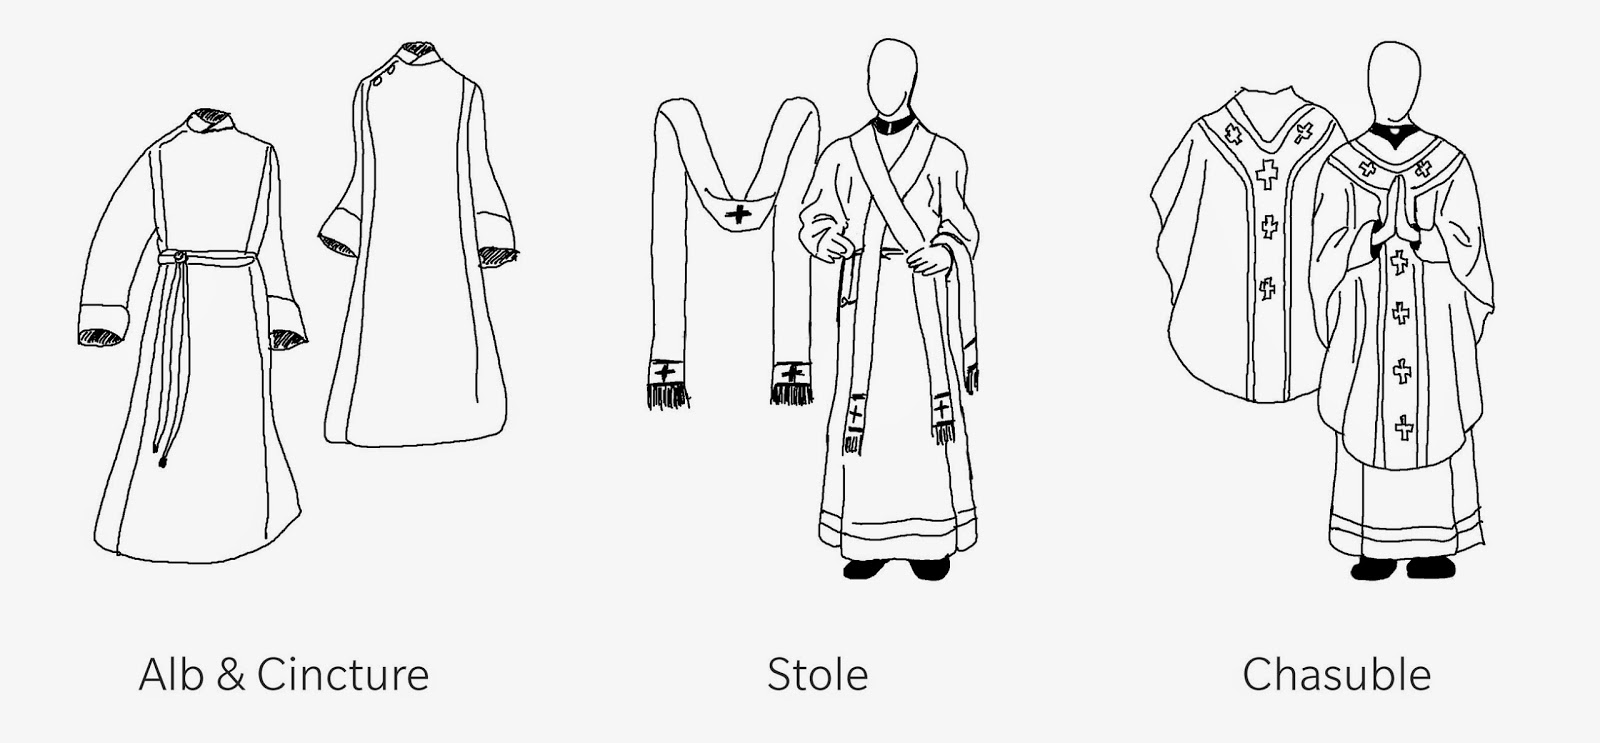 Vestment, Clergy, Archdiocese